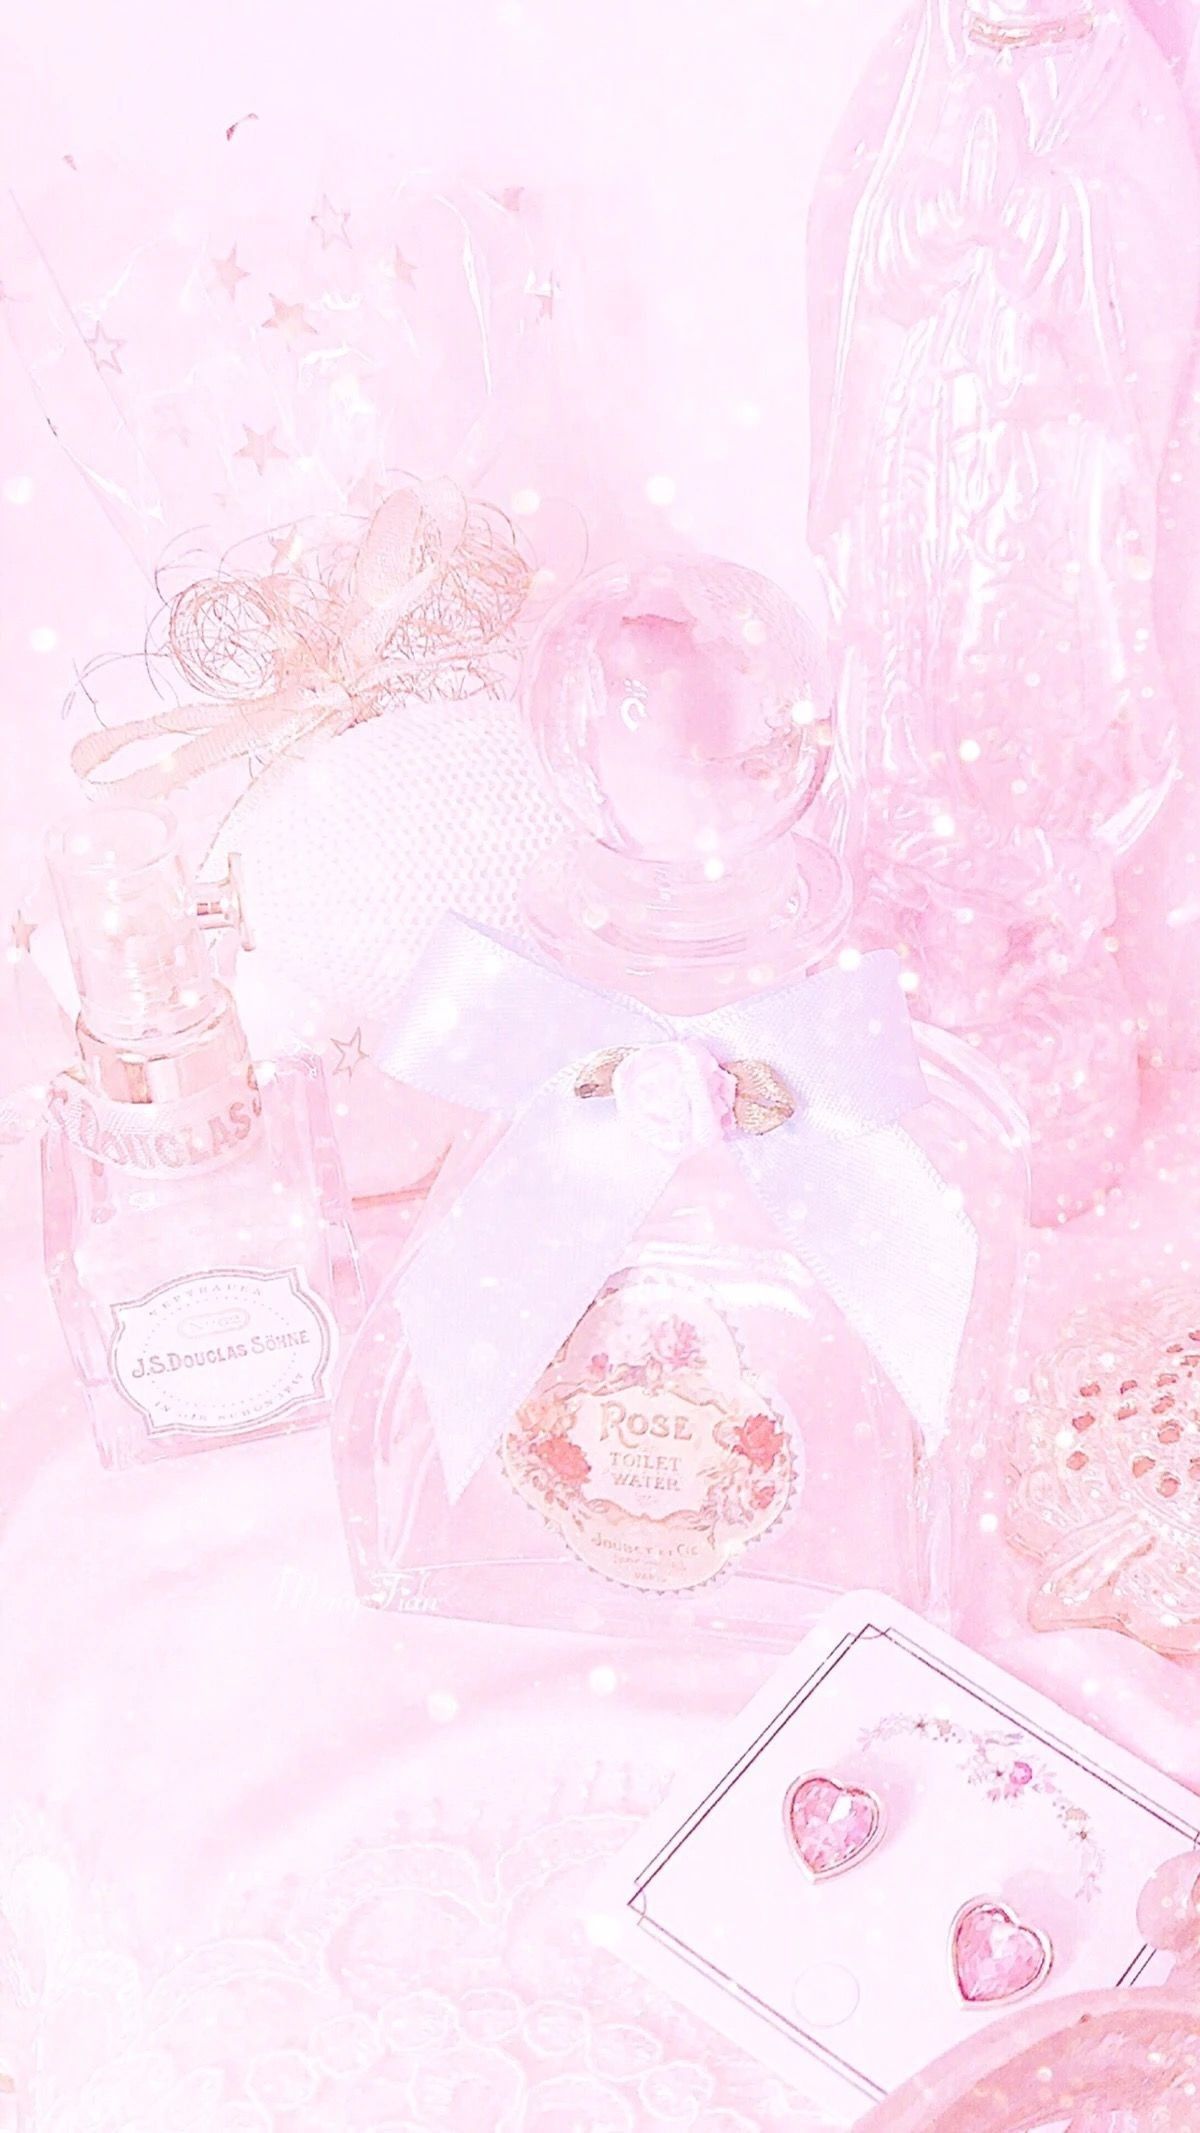 A pink aesthetic background image with a pink bottle of perfume, a pink bow, and a pink crystal ball. - Princess, diamond, pastel pink